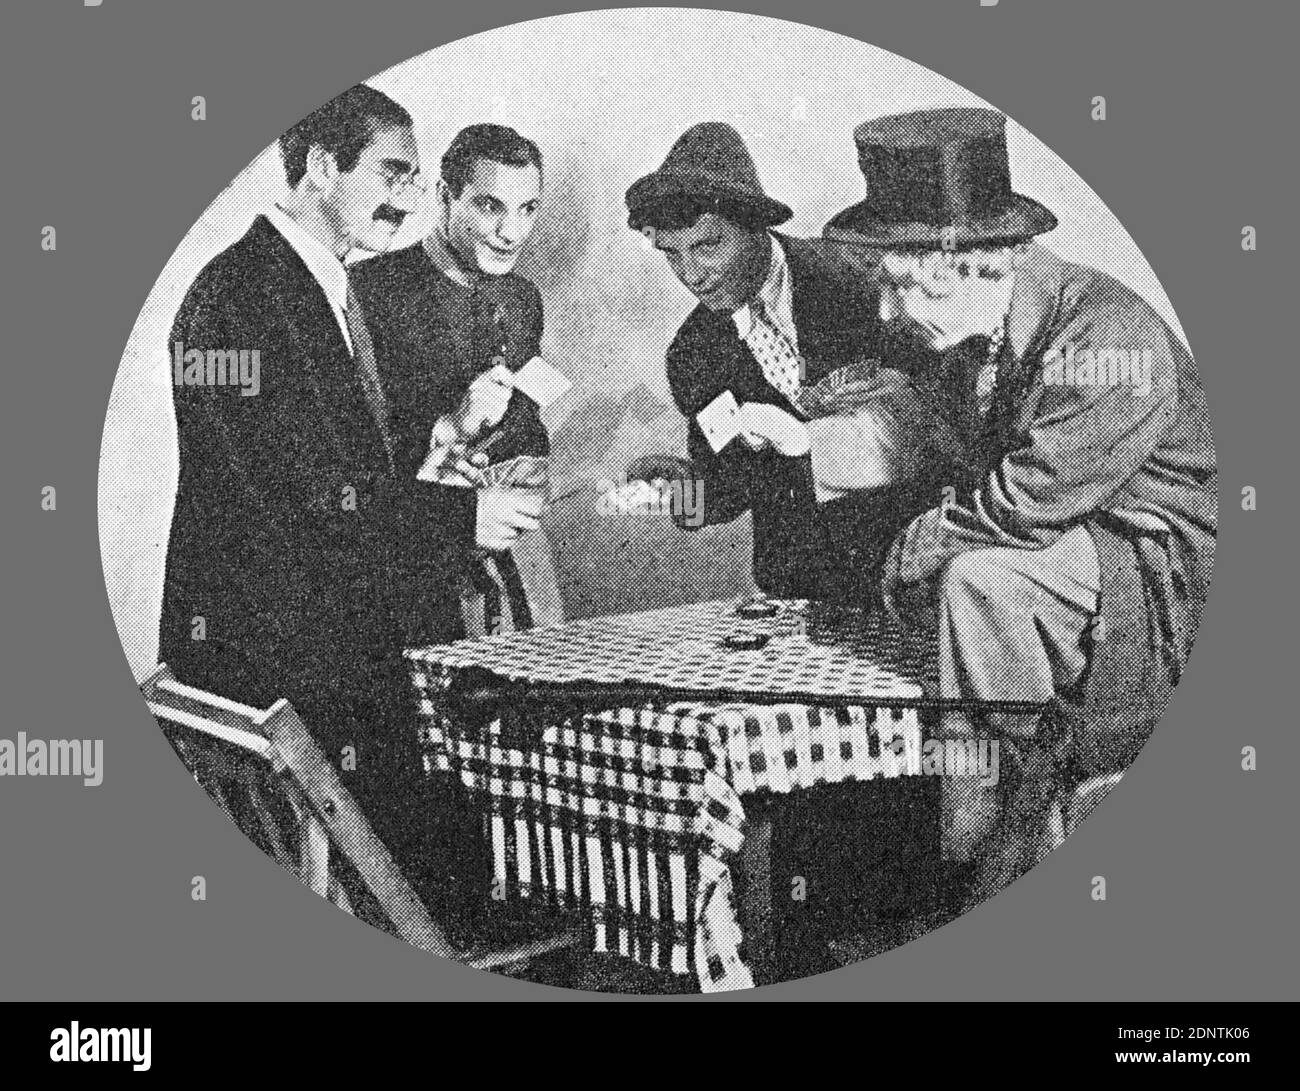 Film still from 'Duck Soup' starring Groucho Marx, Harpo Marx, Chico Marx, and Margaret Dumont. Stock Photo